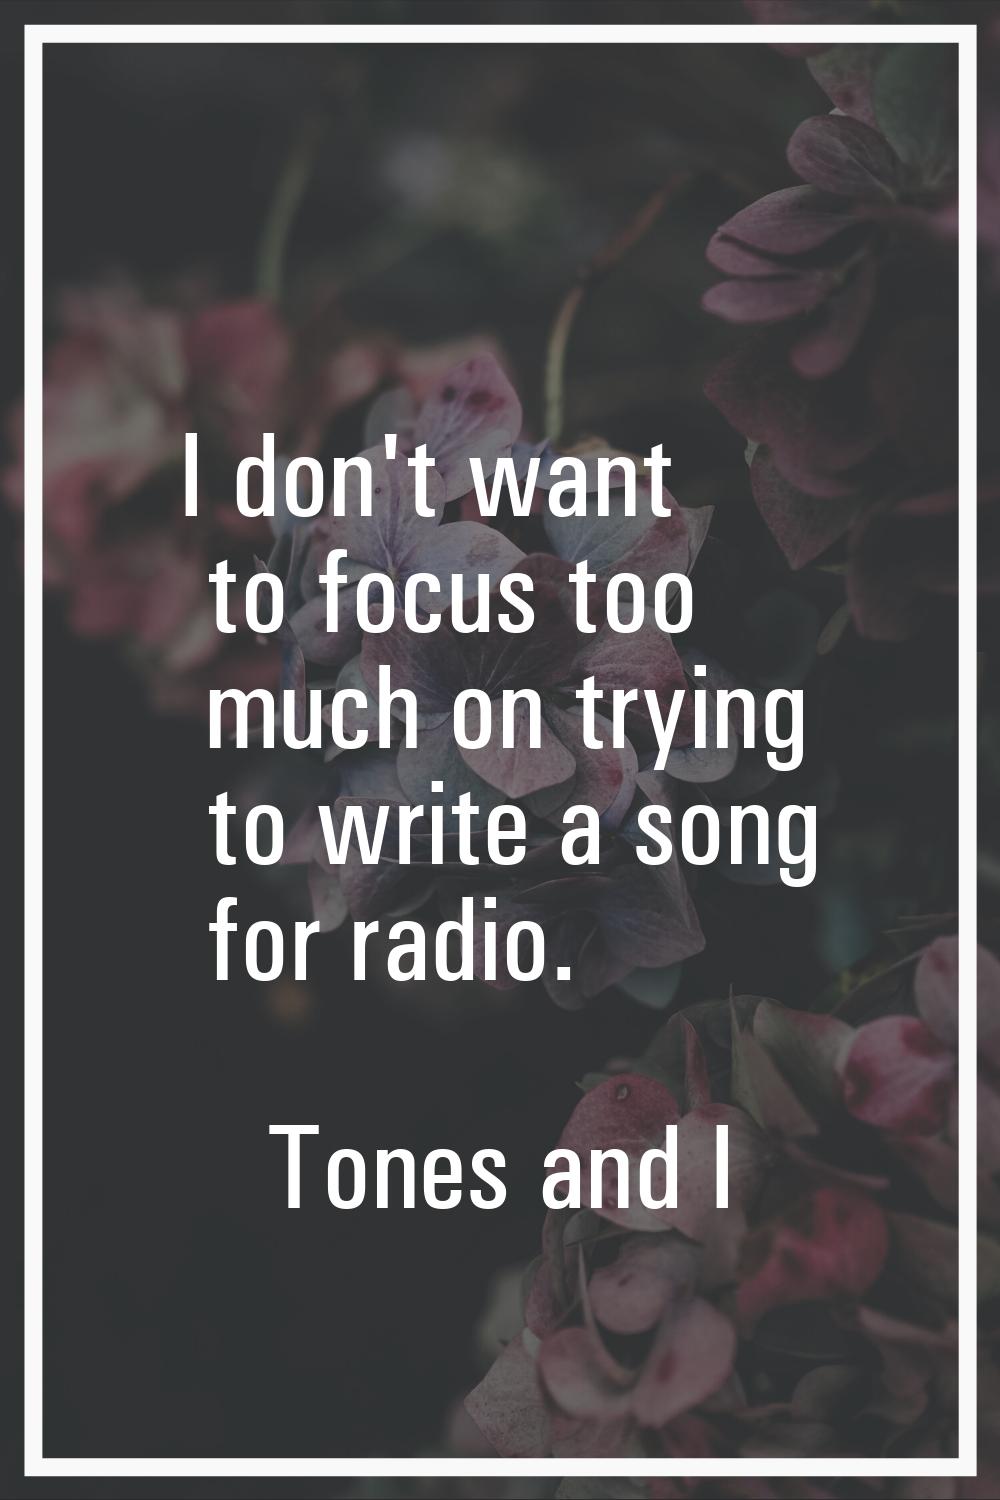 I don't want to focus too much on trying to write a song for radio.